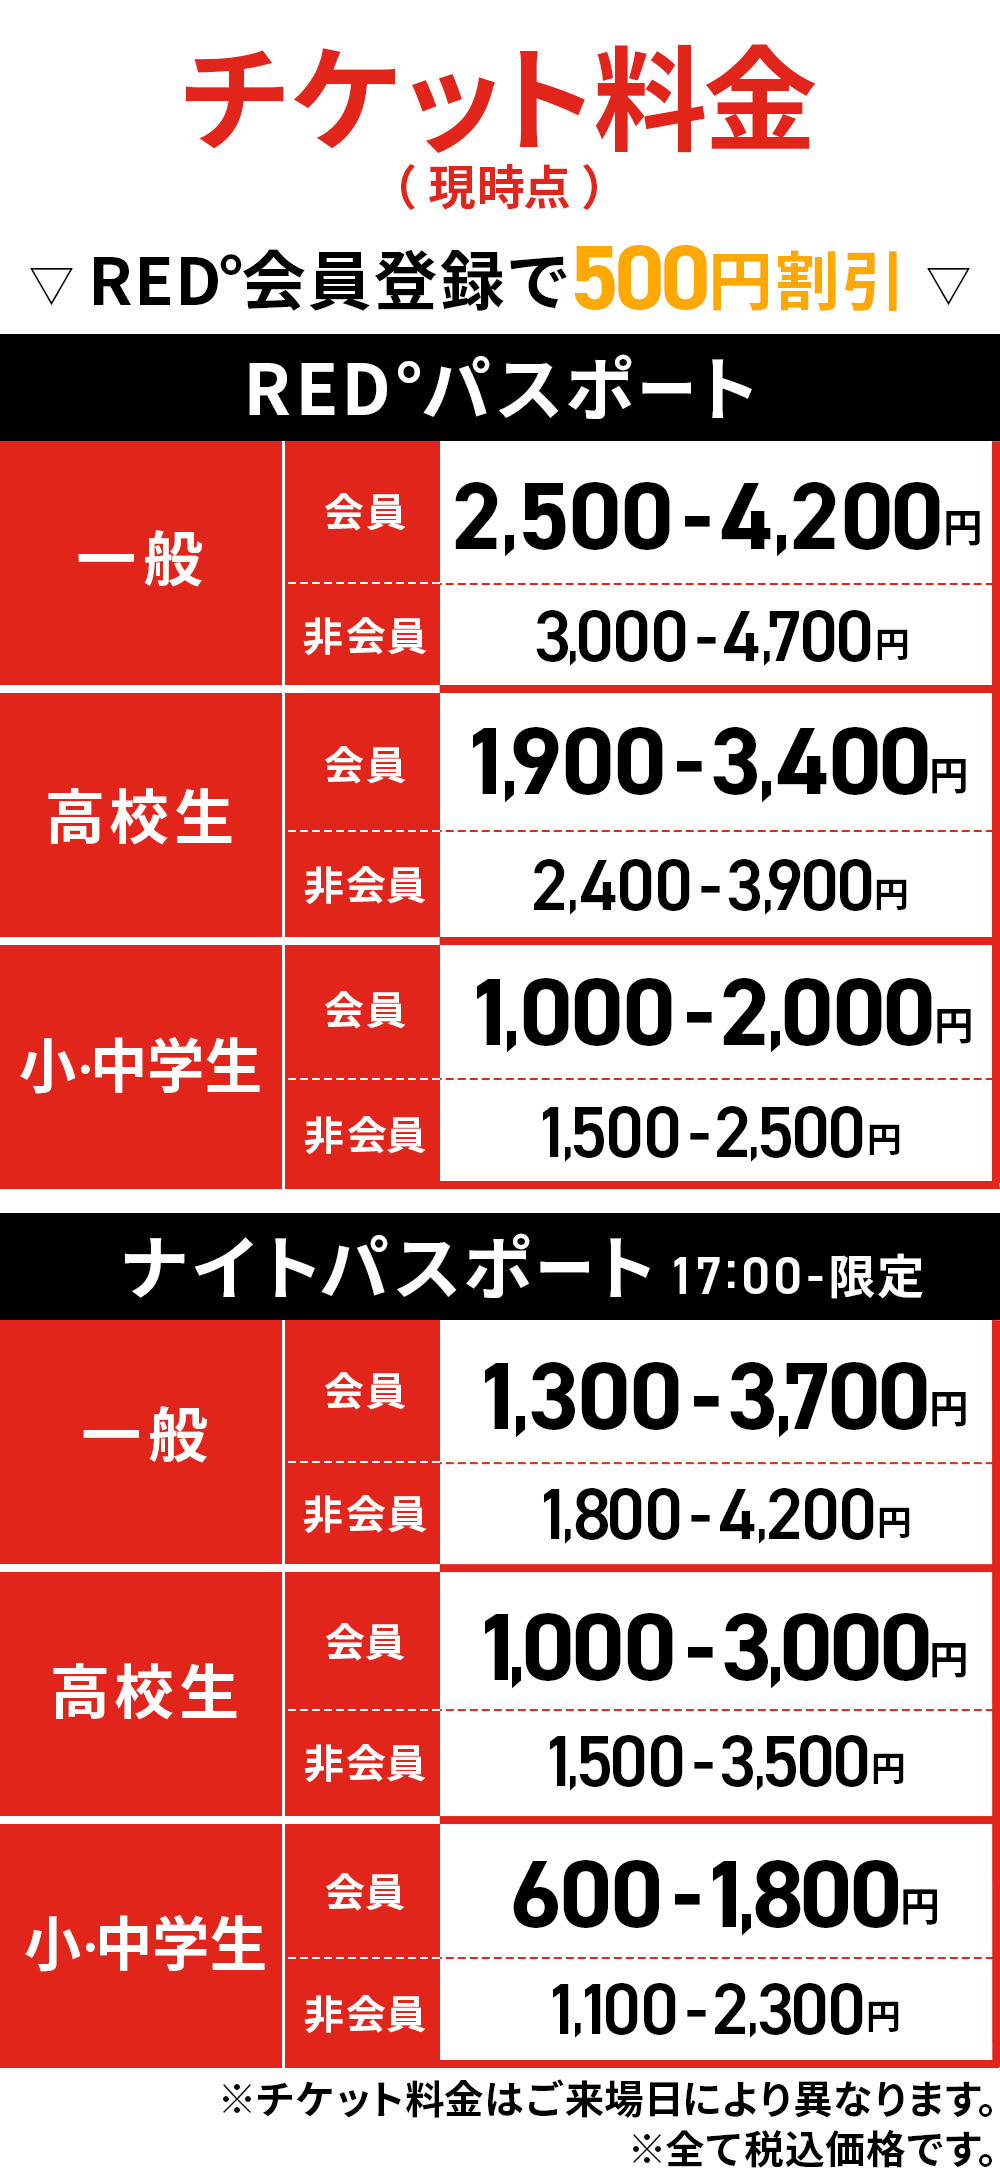 TICKETS | RED° TOKYO TOWER OFFICIAL WEBSITE